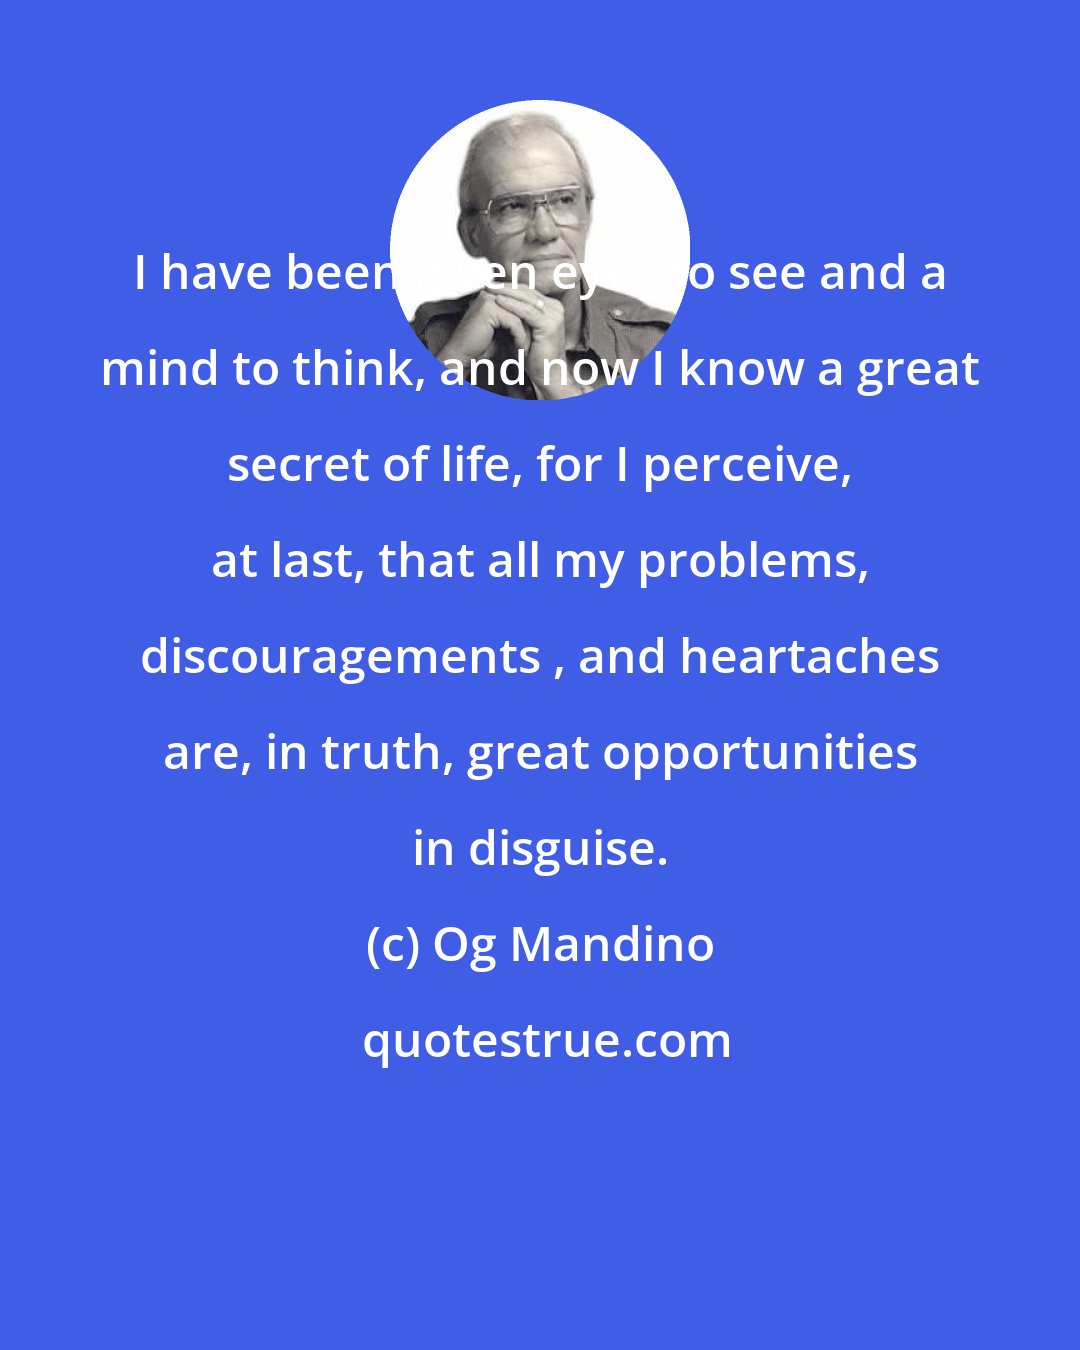 Og Mandino: I have been given eyes to see and a mind to think, and now I know a great secret of life, for I perceive, at last, that all my problems, discouragements , and heartaches are, in truth, great opportunities in disguise.